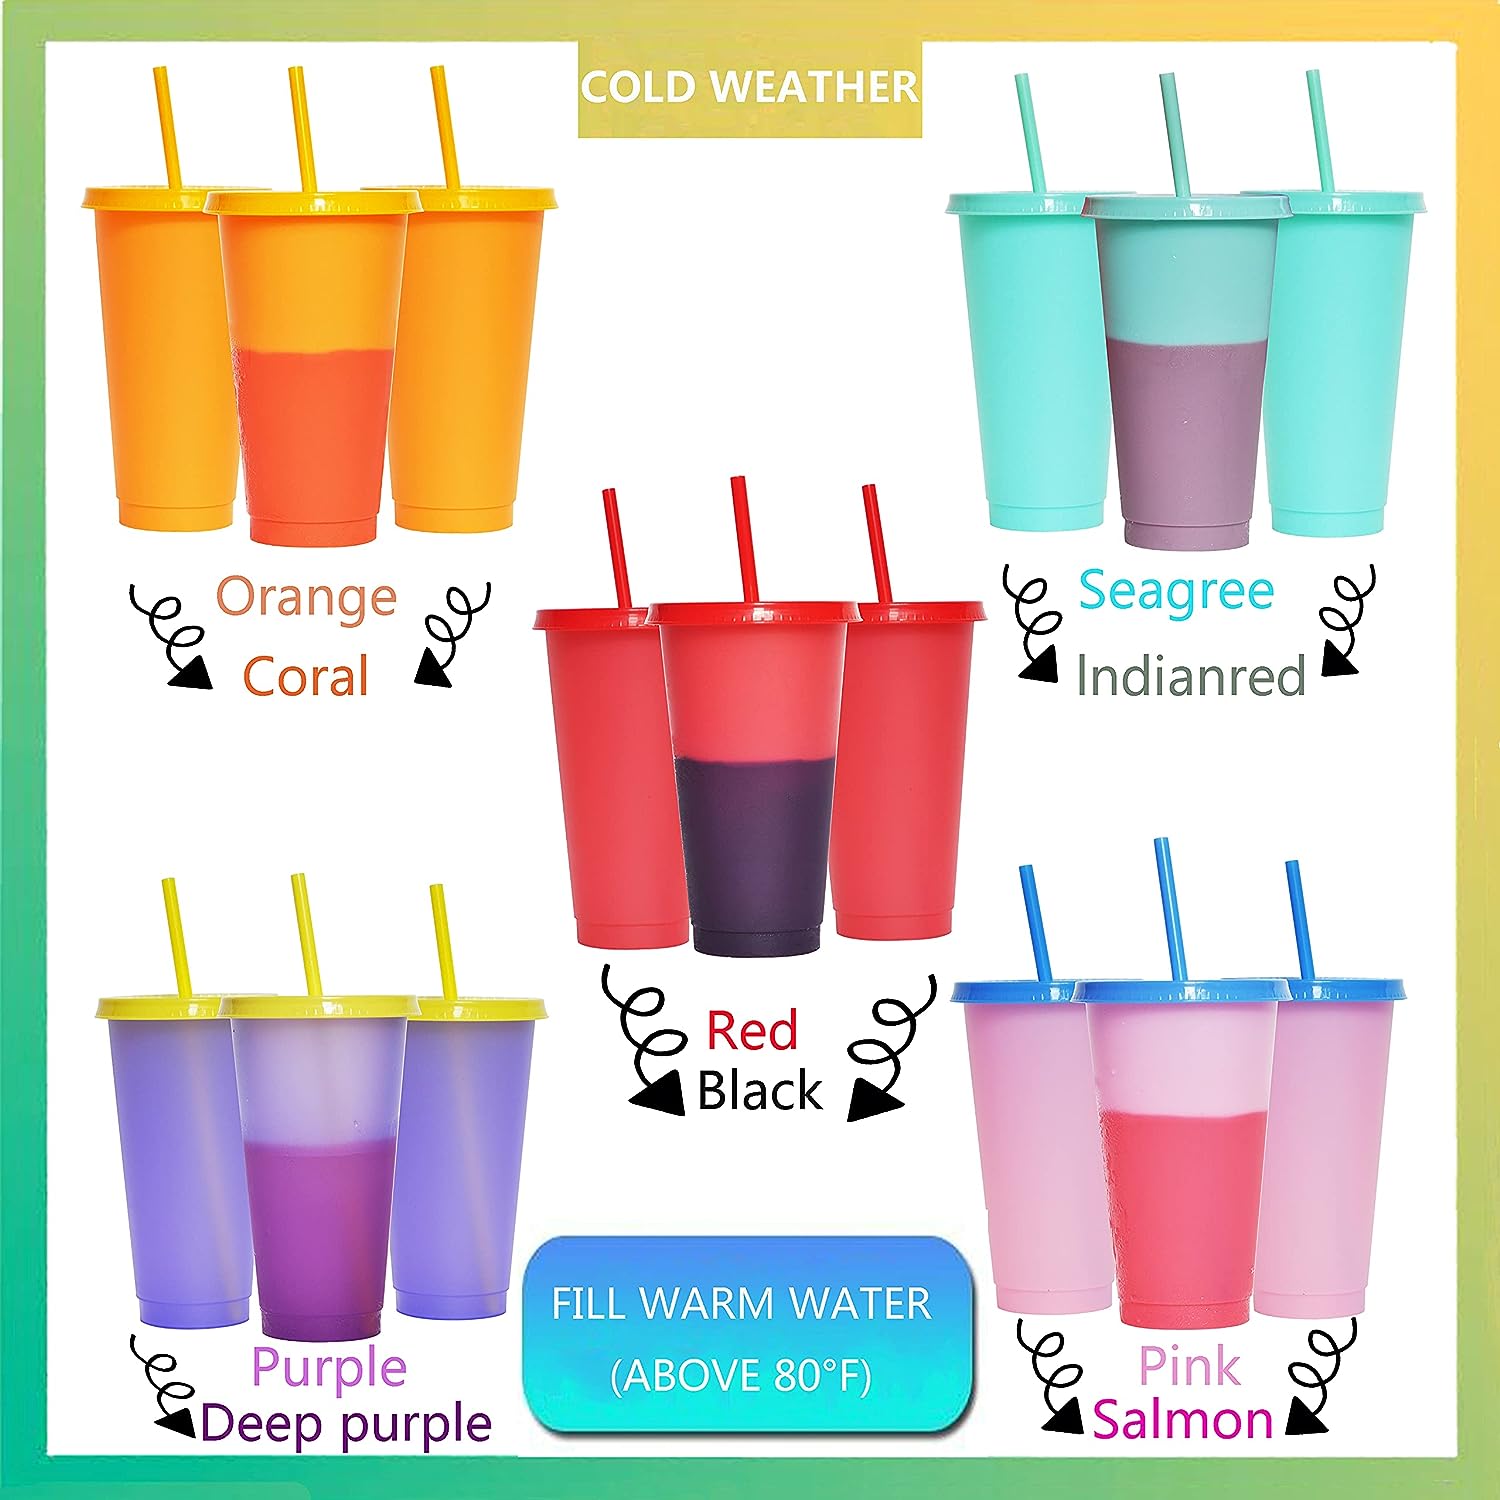 10pcs Color Changing Cups with Lids and Straws 24oz, Reusable